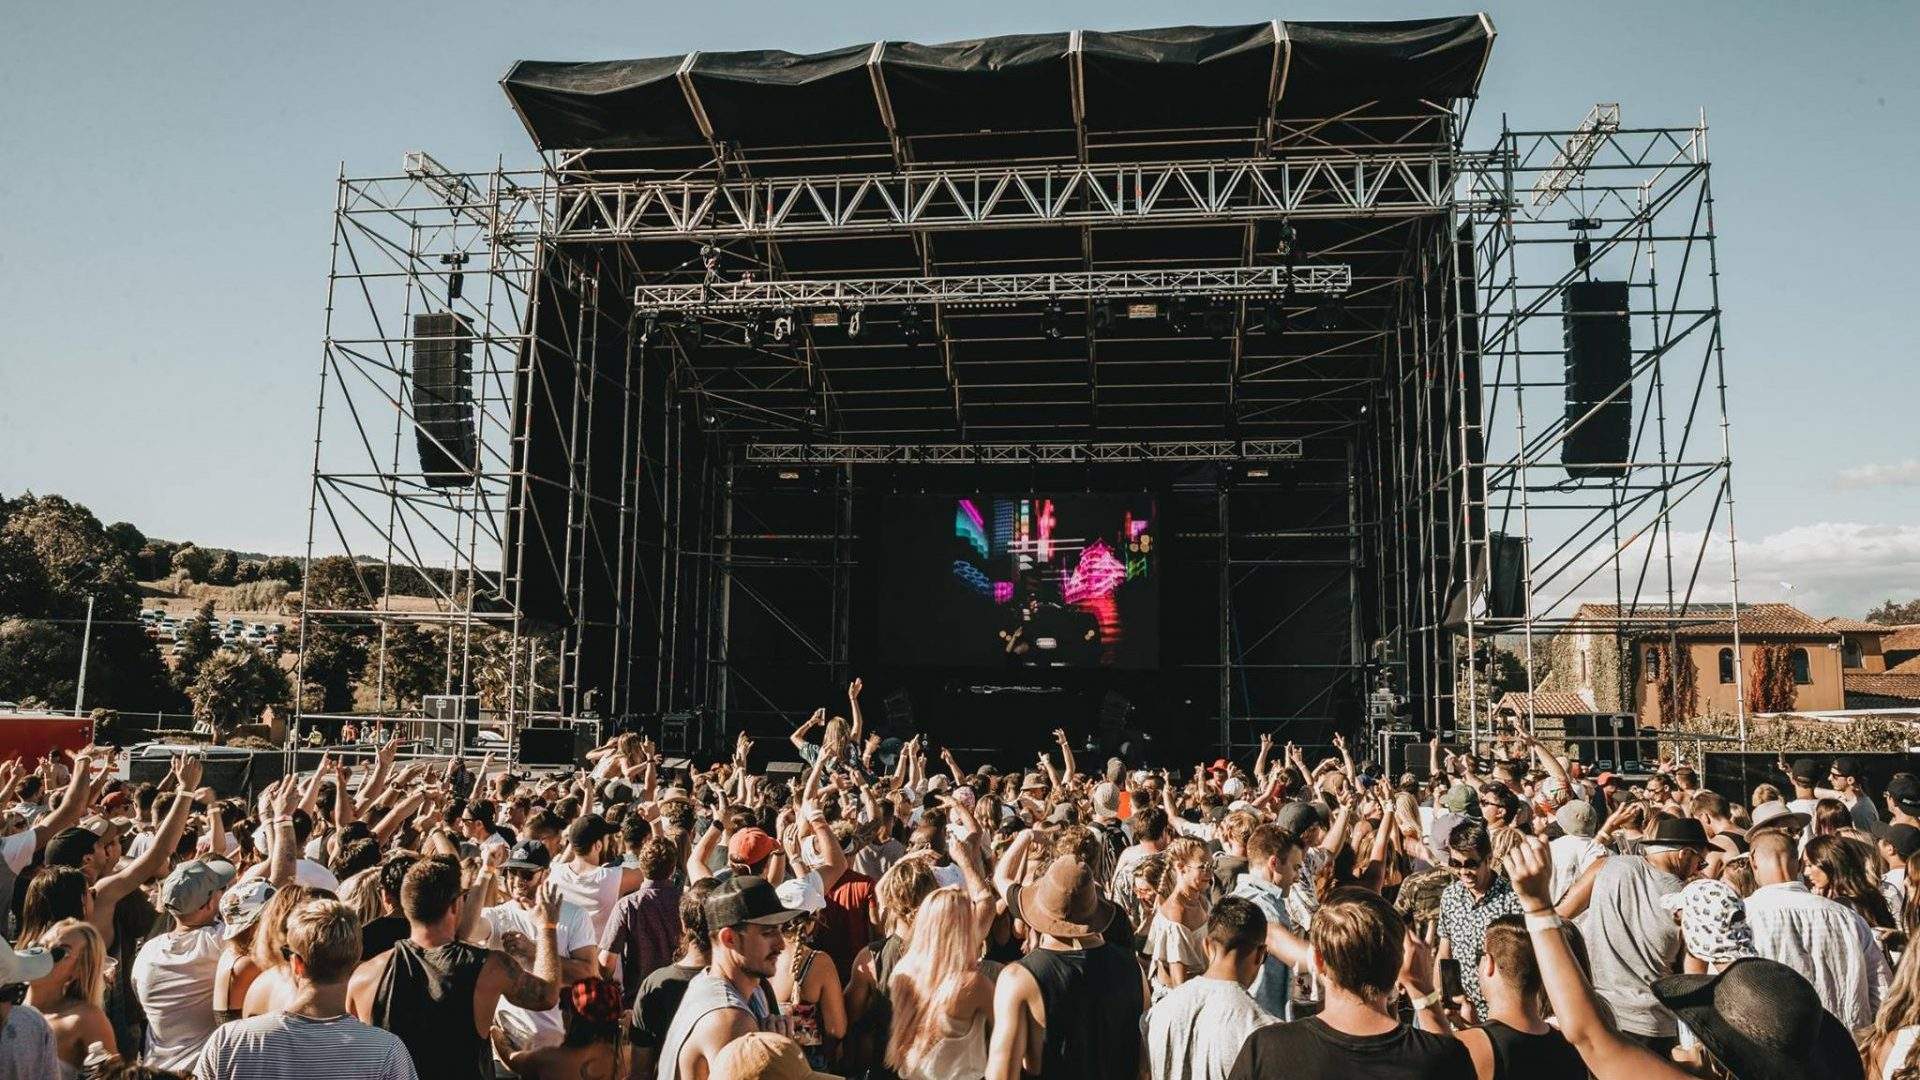 Northern Bass, Hidden Valley and Other NYE Festivals Have Been Rescheduled Until Next Year